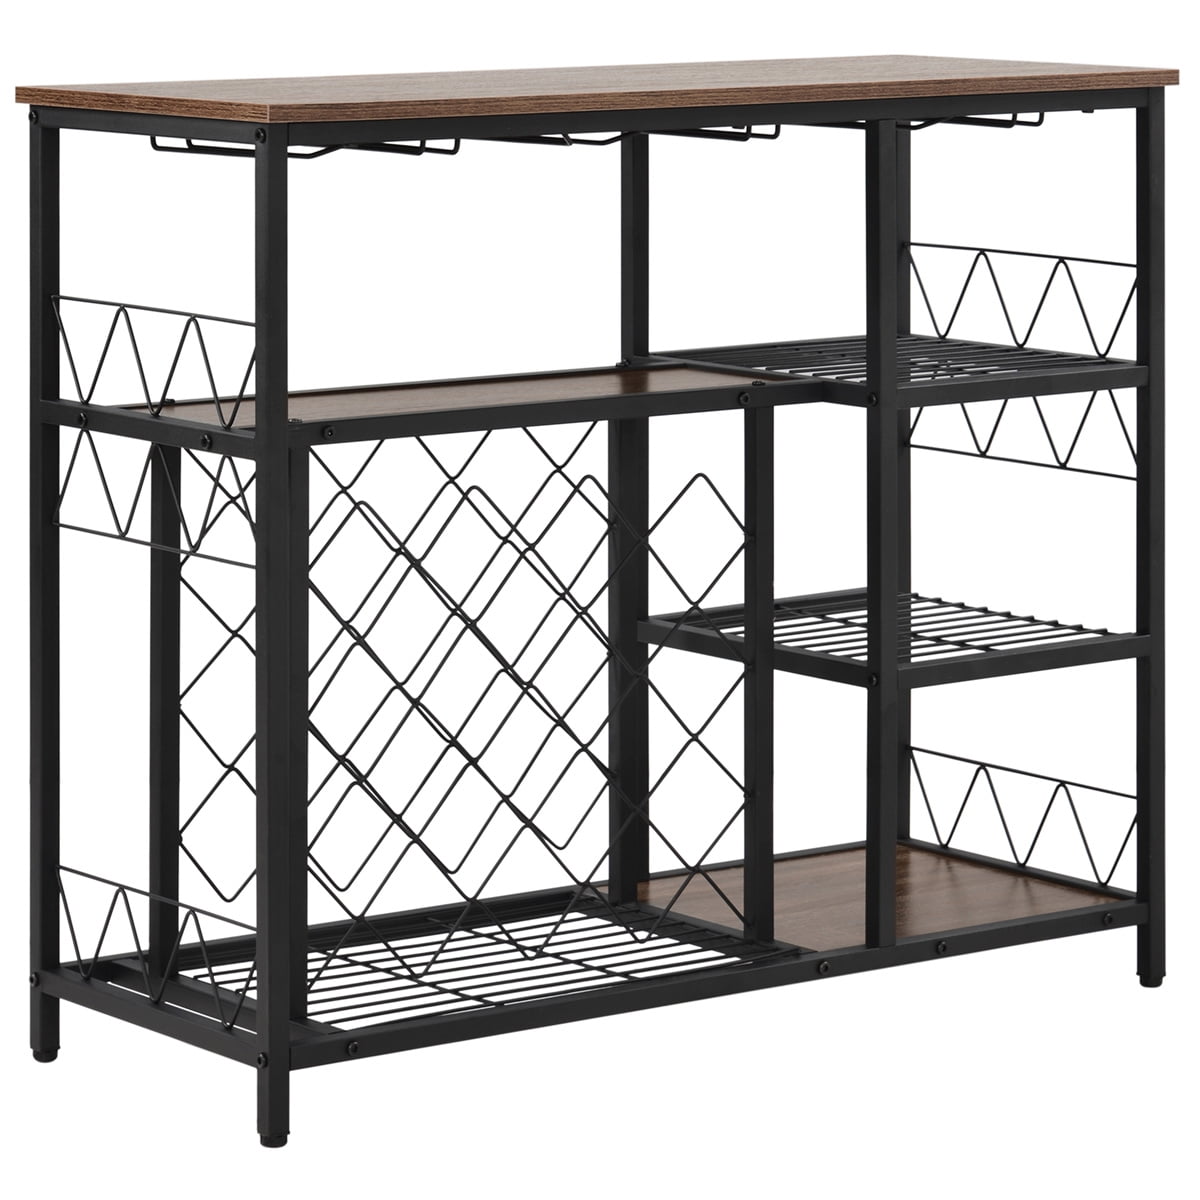 Aoibox Black Faux Marble 47.2 in. W Prep Table Kitchen Island Kitchen Rack Console Table W Shelves and Glass Rack, Black and White SNMX4567